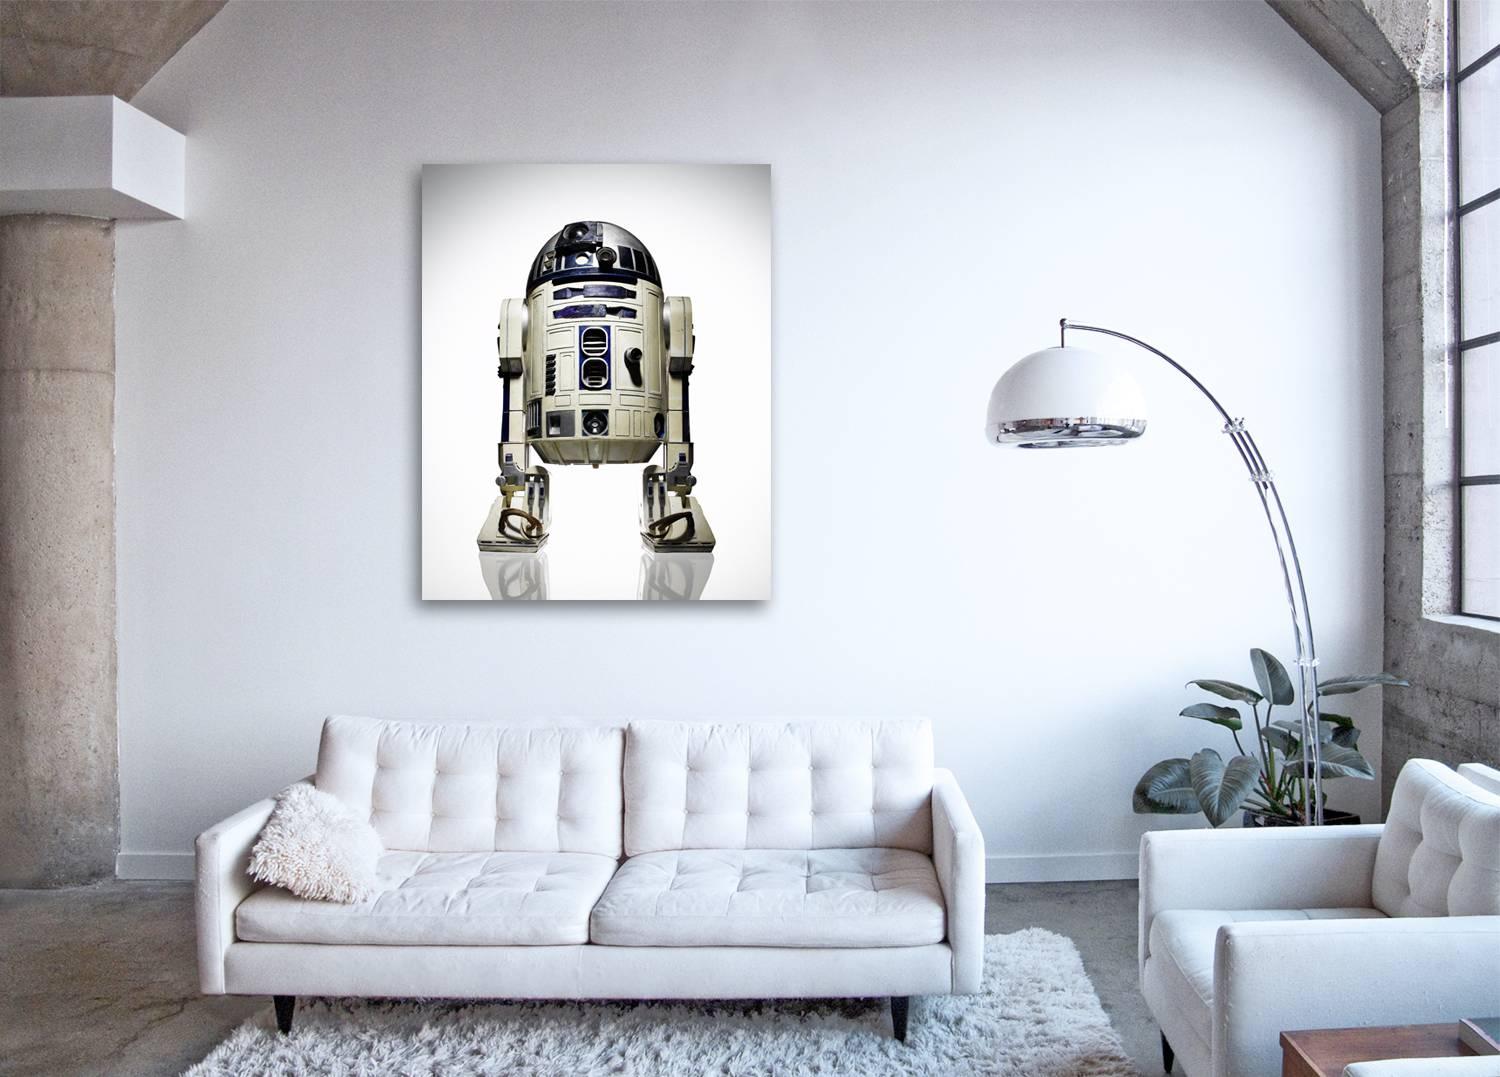 Star Wars R2-D2 - large format photograph of the original iconic droid robot - Photograph by Tom Schierlitz